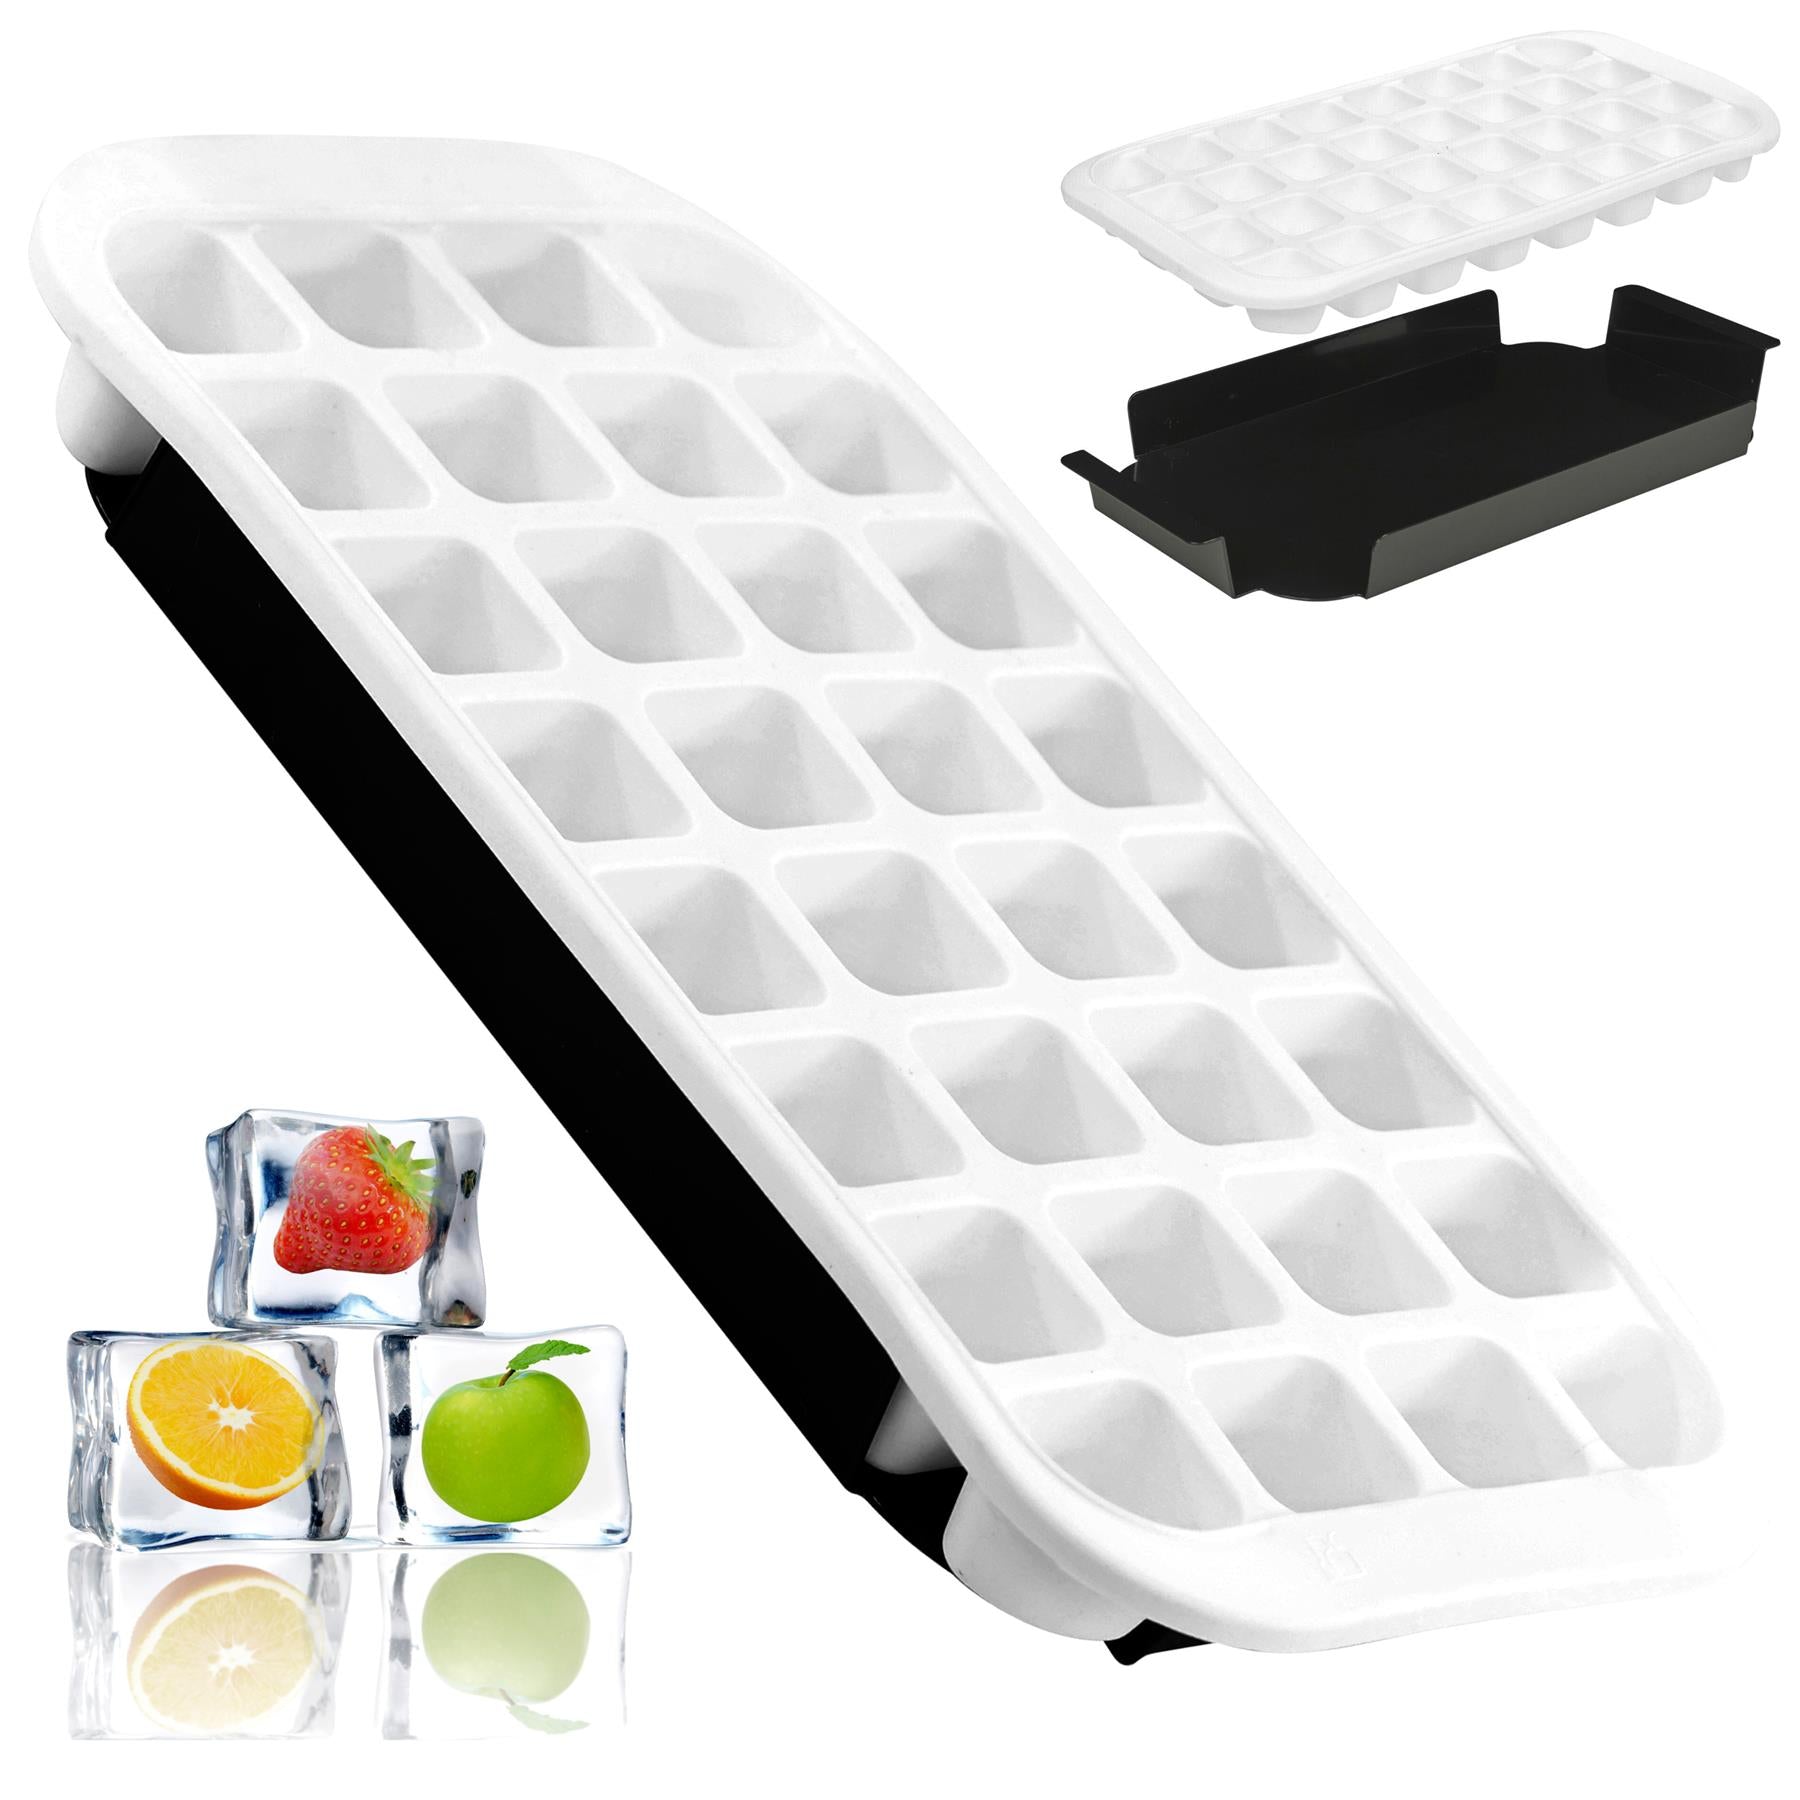 GEEZY Ice Cube Mold with Tray Silicone 32 Ice Cube Mould with Tray